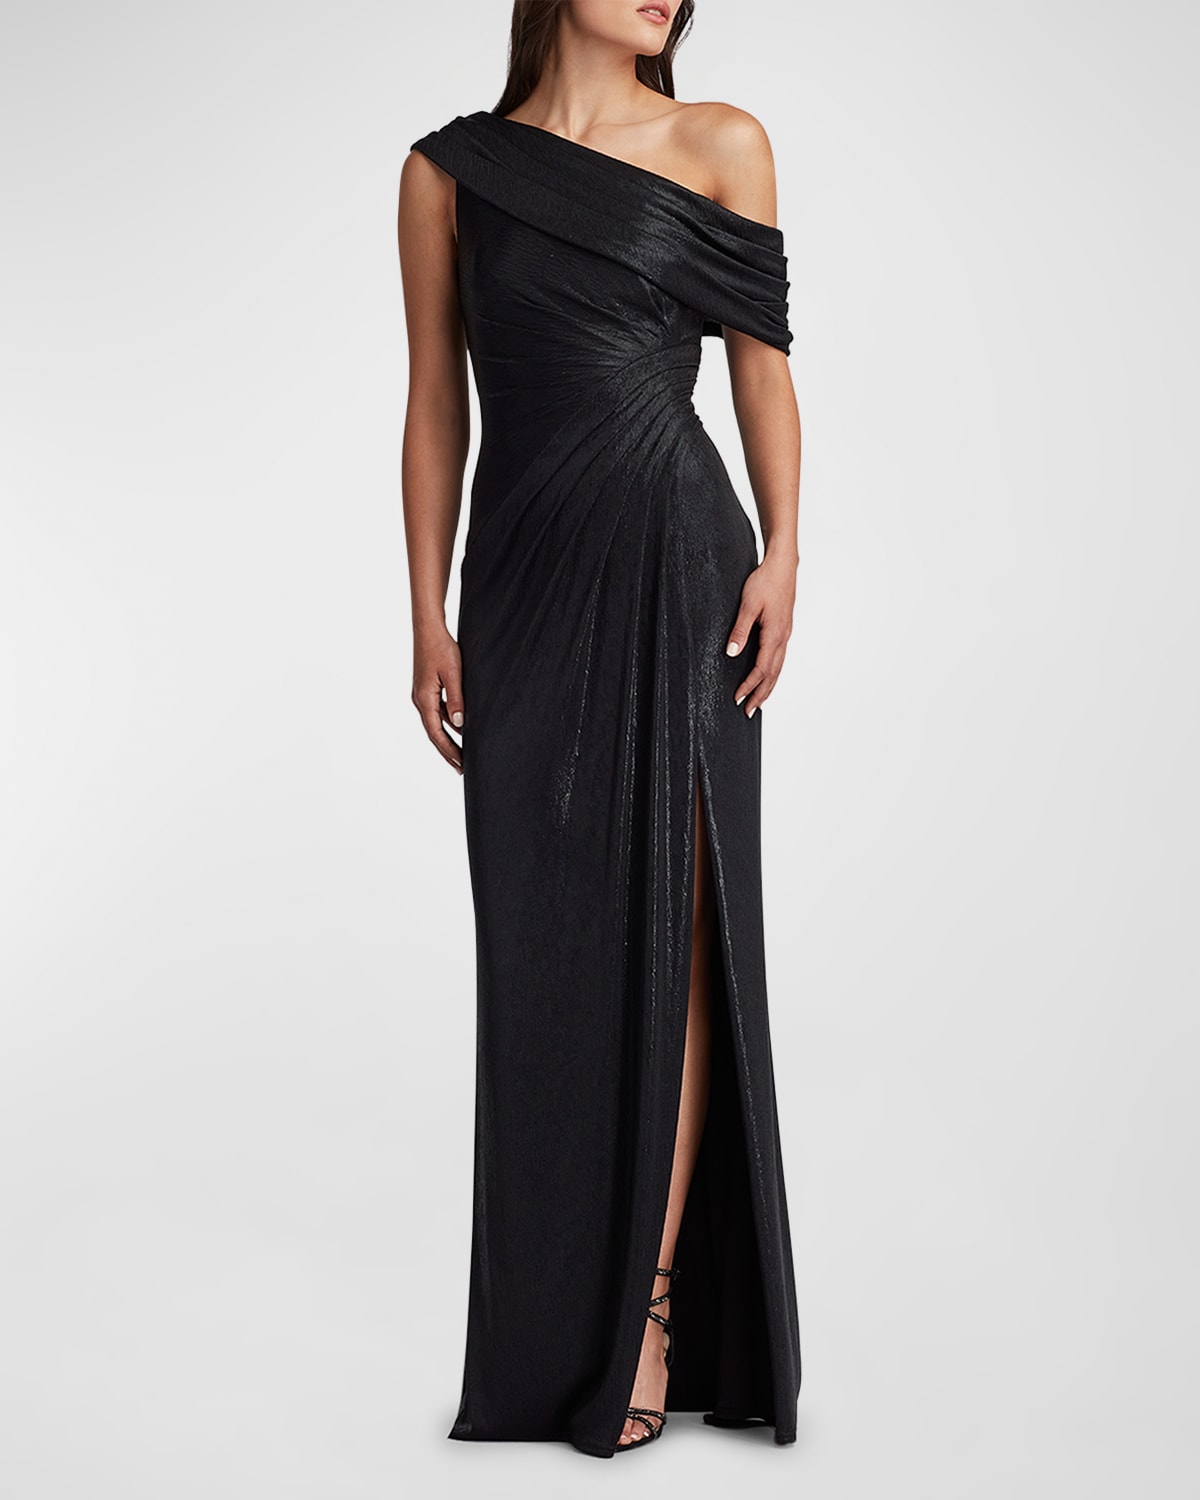 Leary Draped One-Shoulder Gown